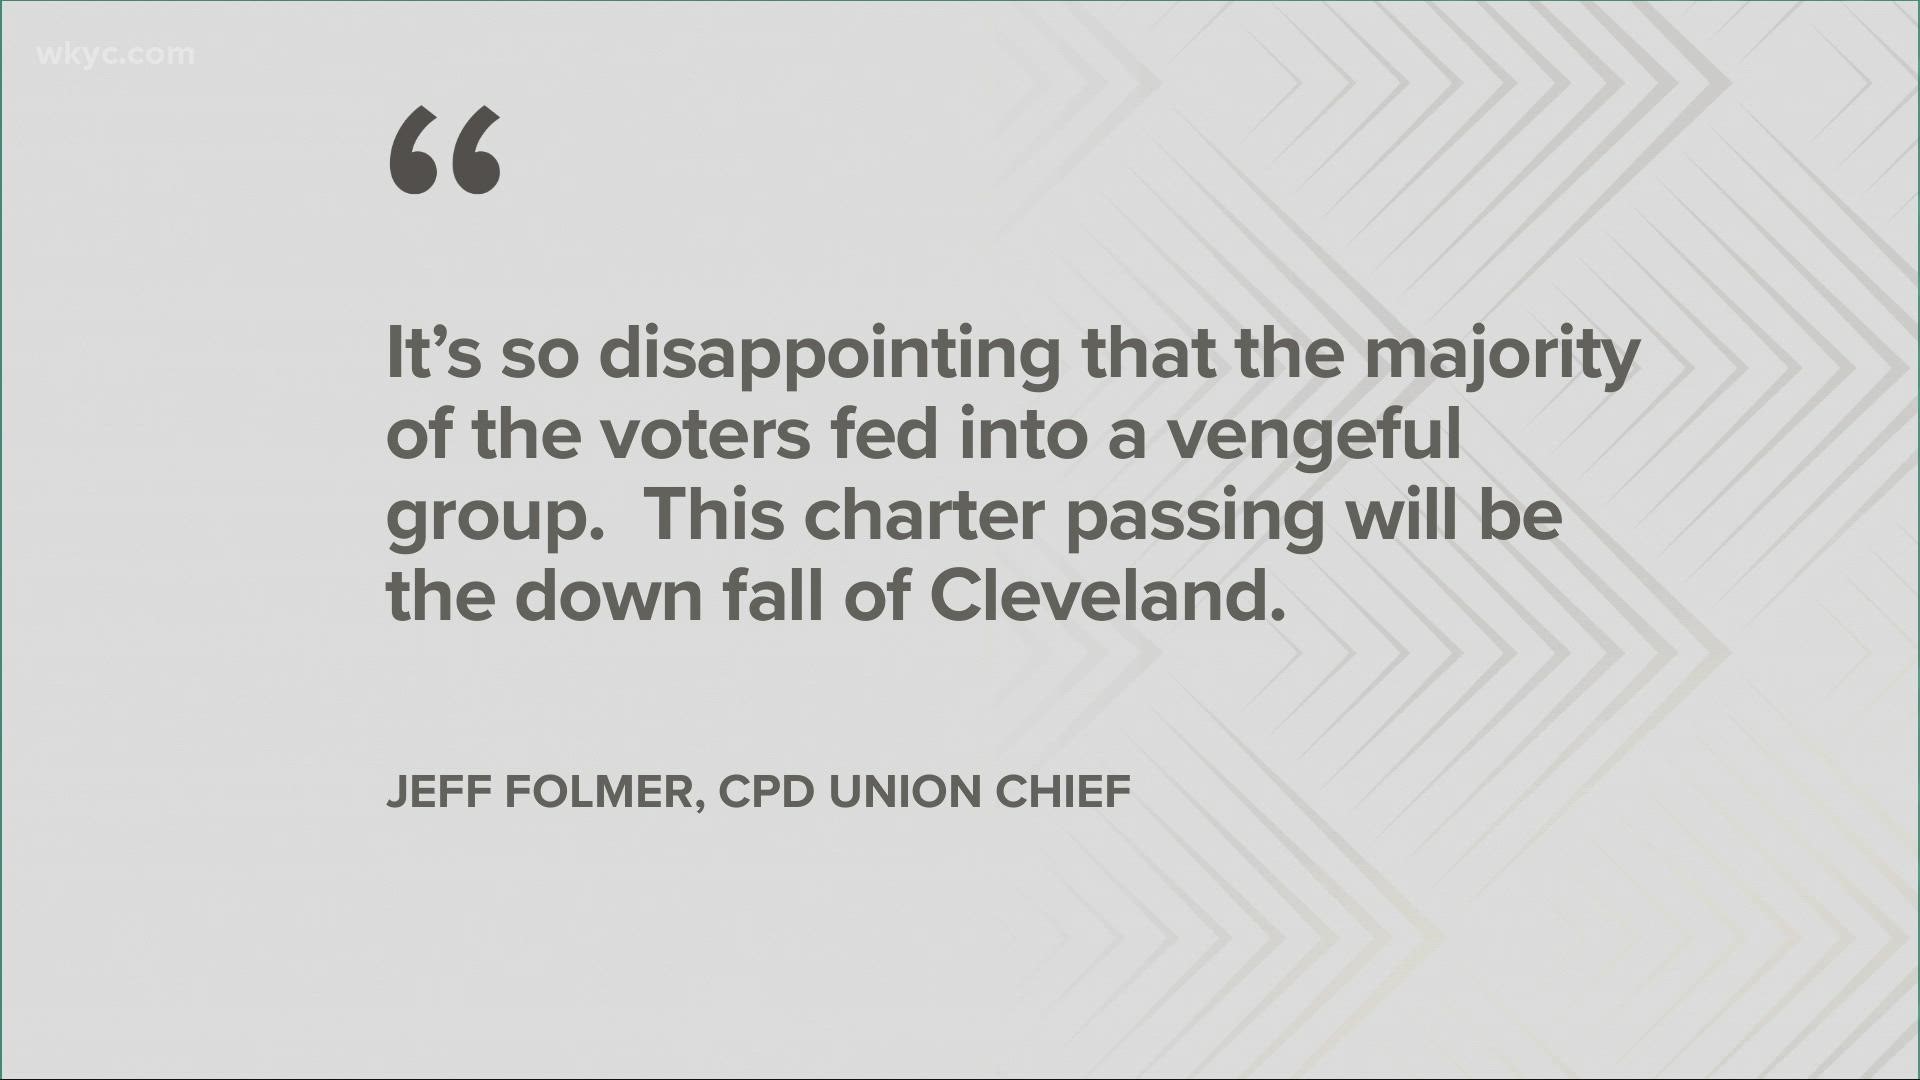 The charter amendment creates a special commission of Cleveland residents that would investigate police misconduct.